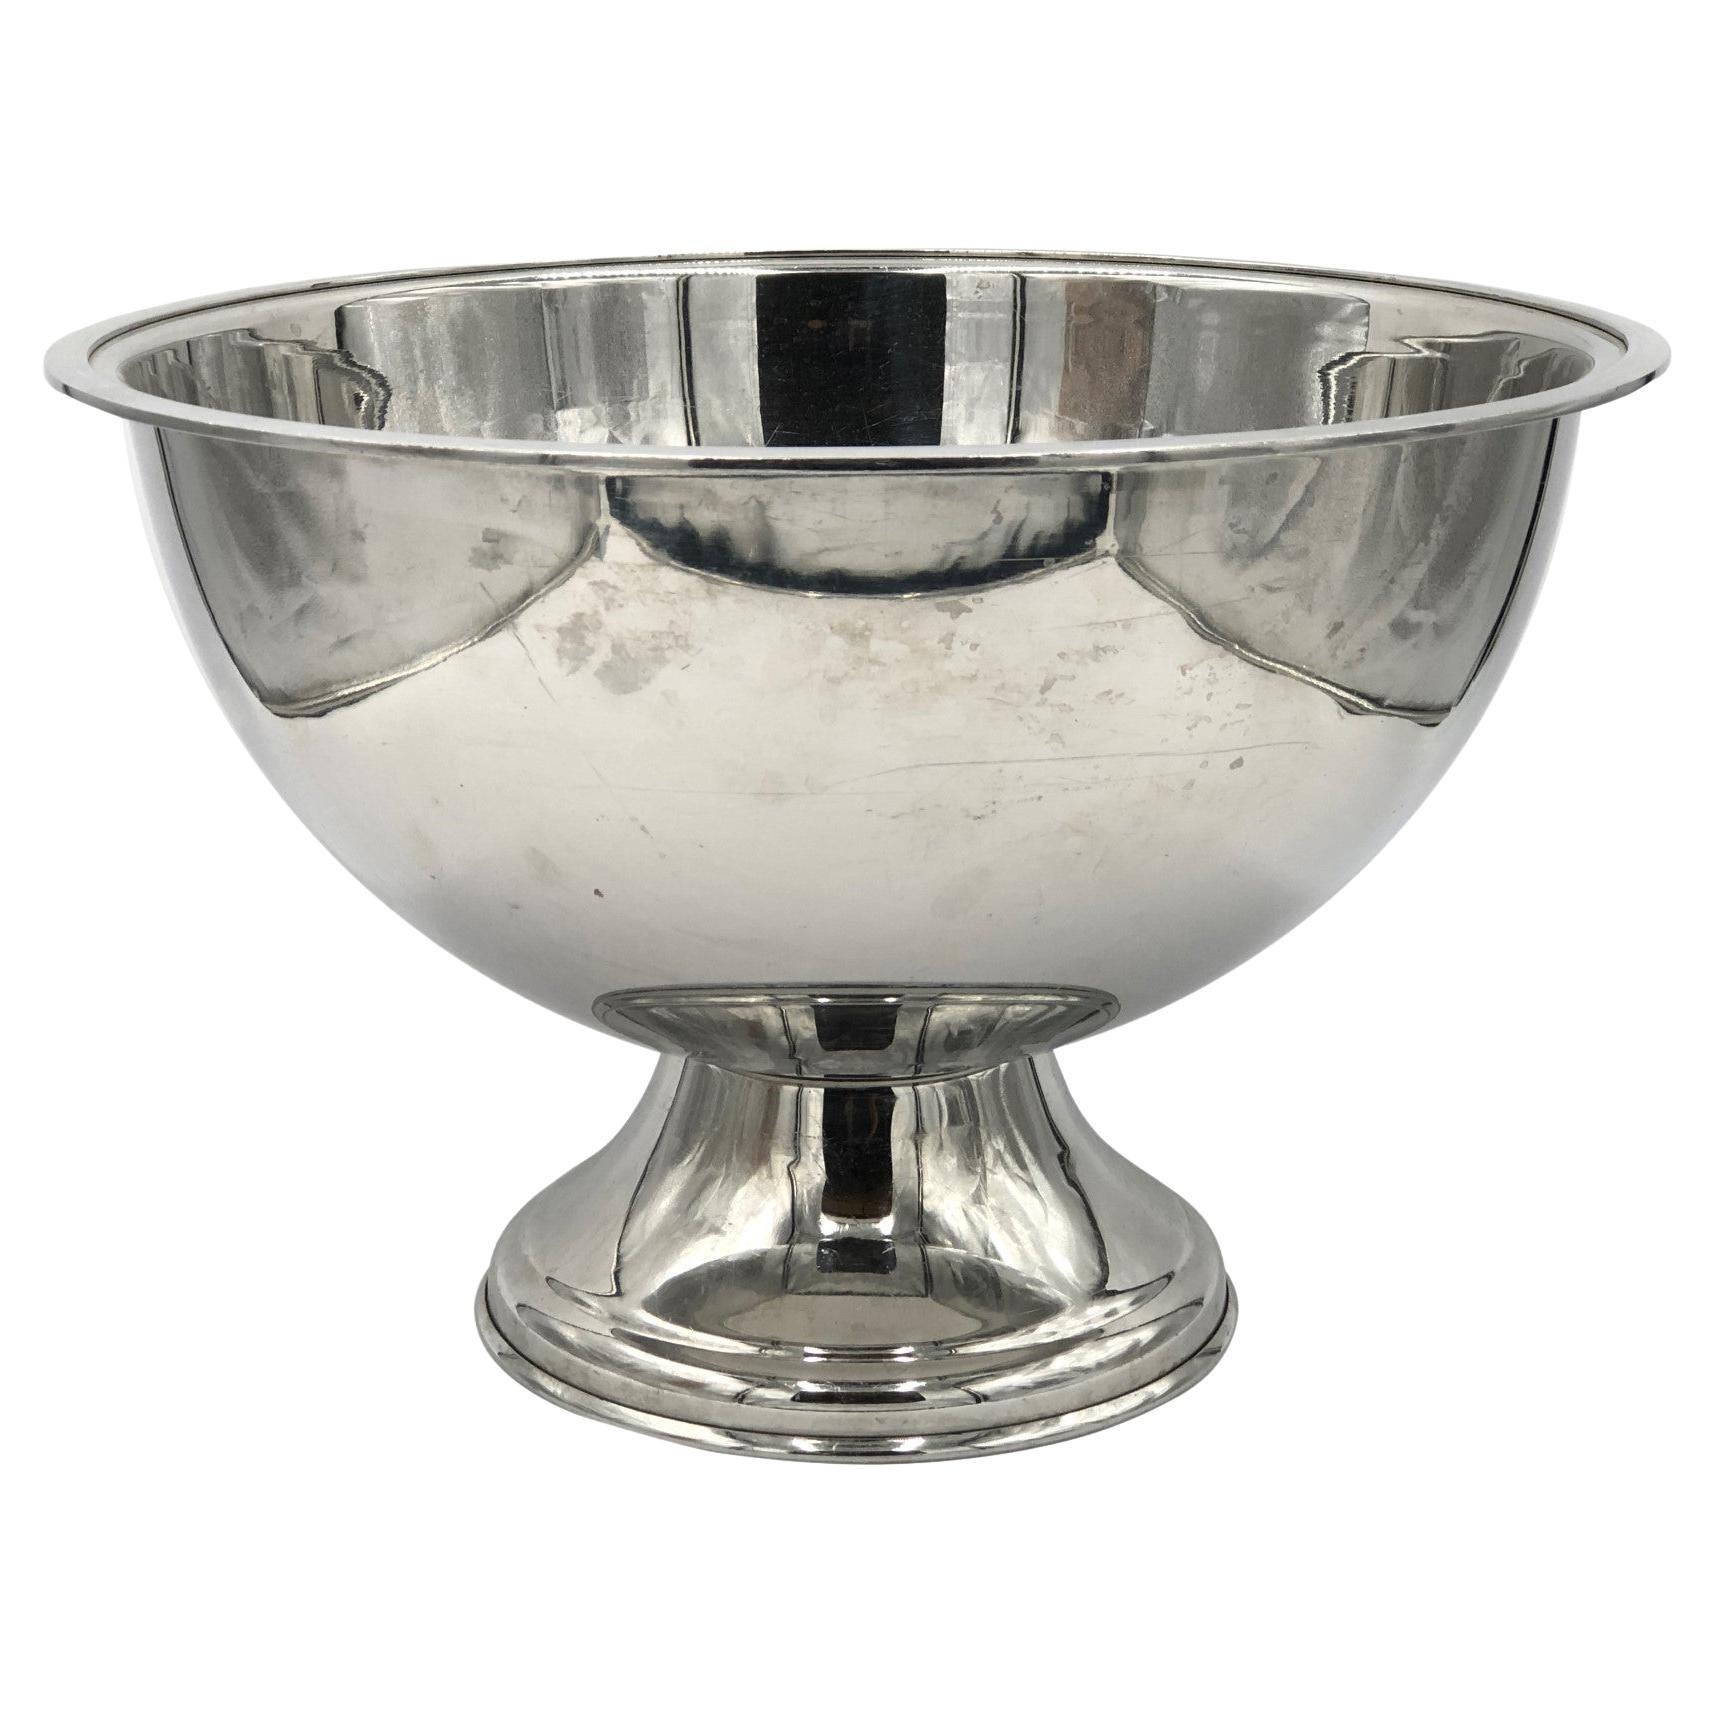 NYC Waldorf Astoria Hotel Stainless Steel Punch Bowl